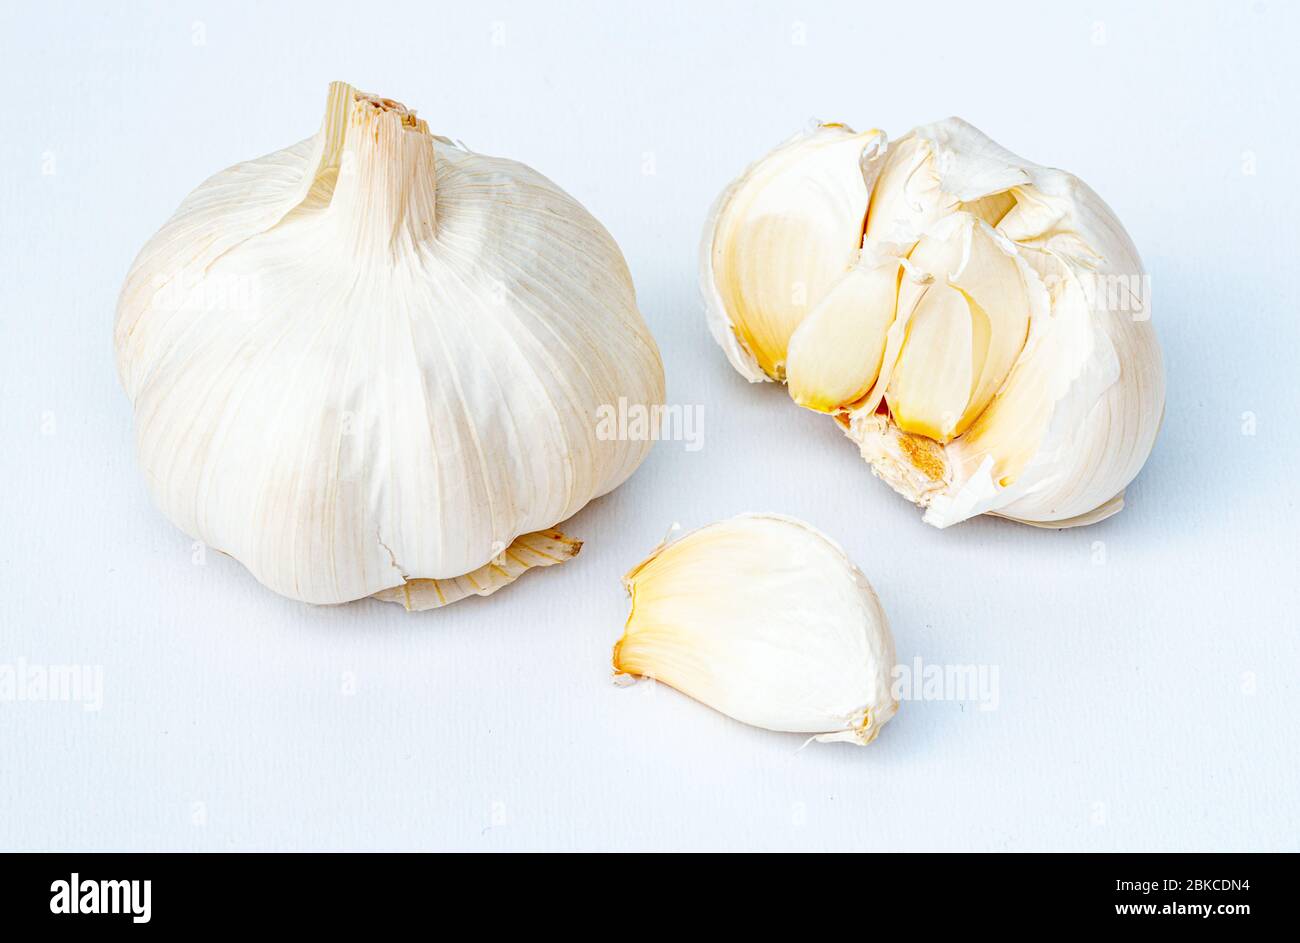 Fresh garlic bulb and cloves on a white background. Garlic is used world wide as a spice for seasoning food and as a traditional medicine. Stock Photo